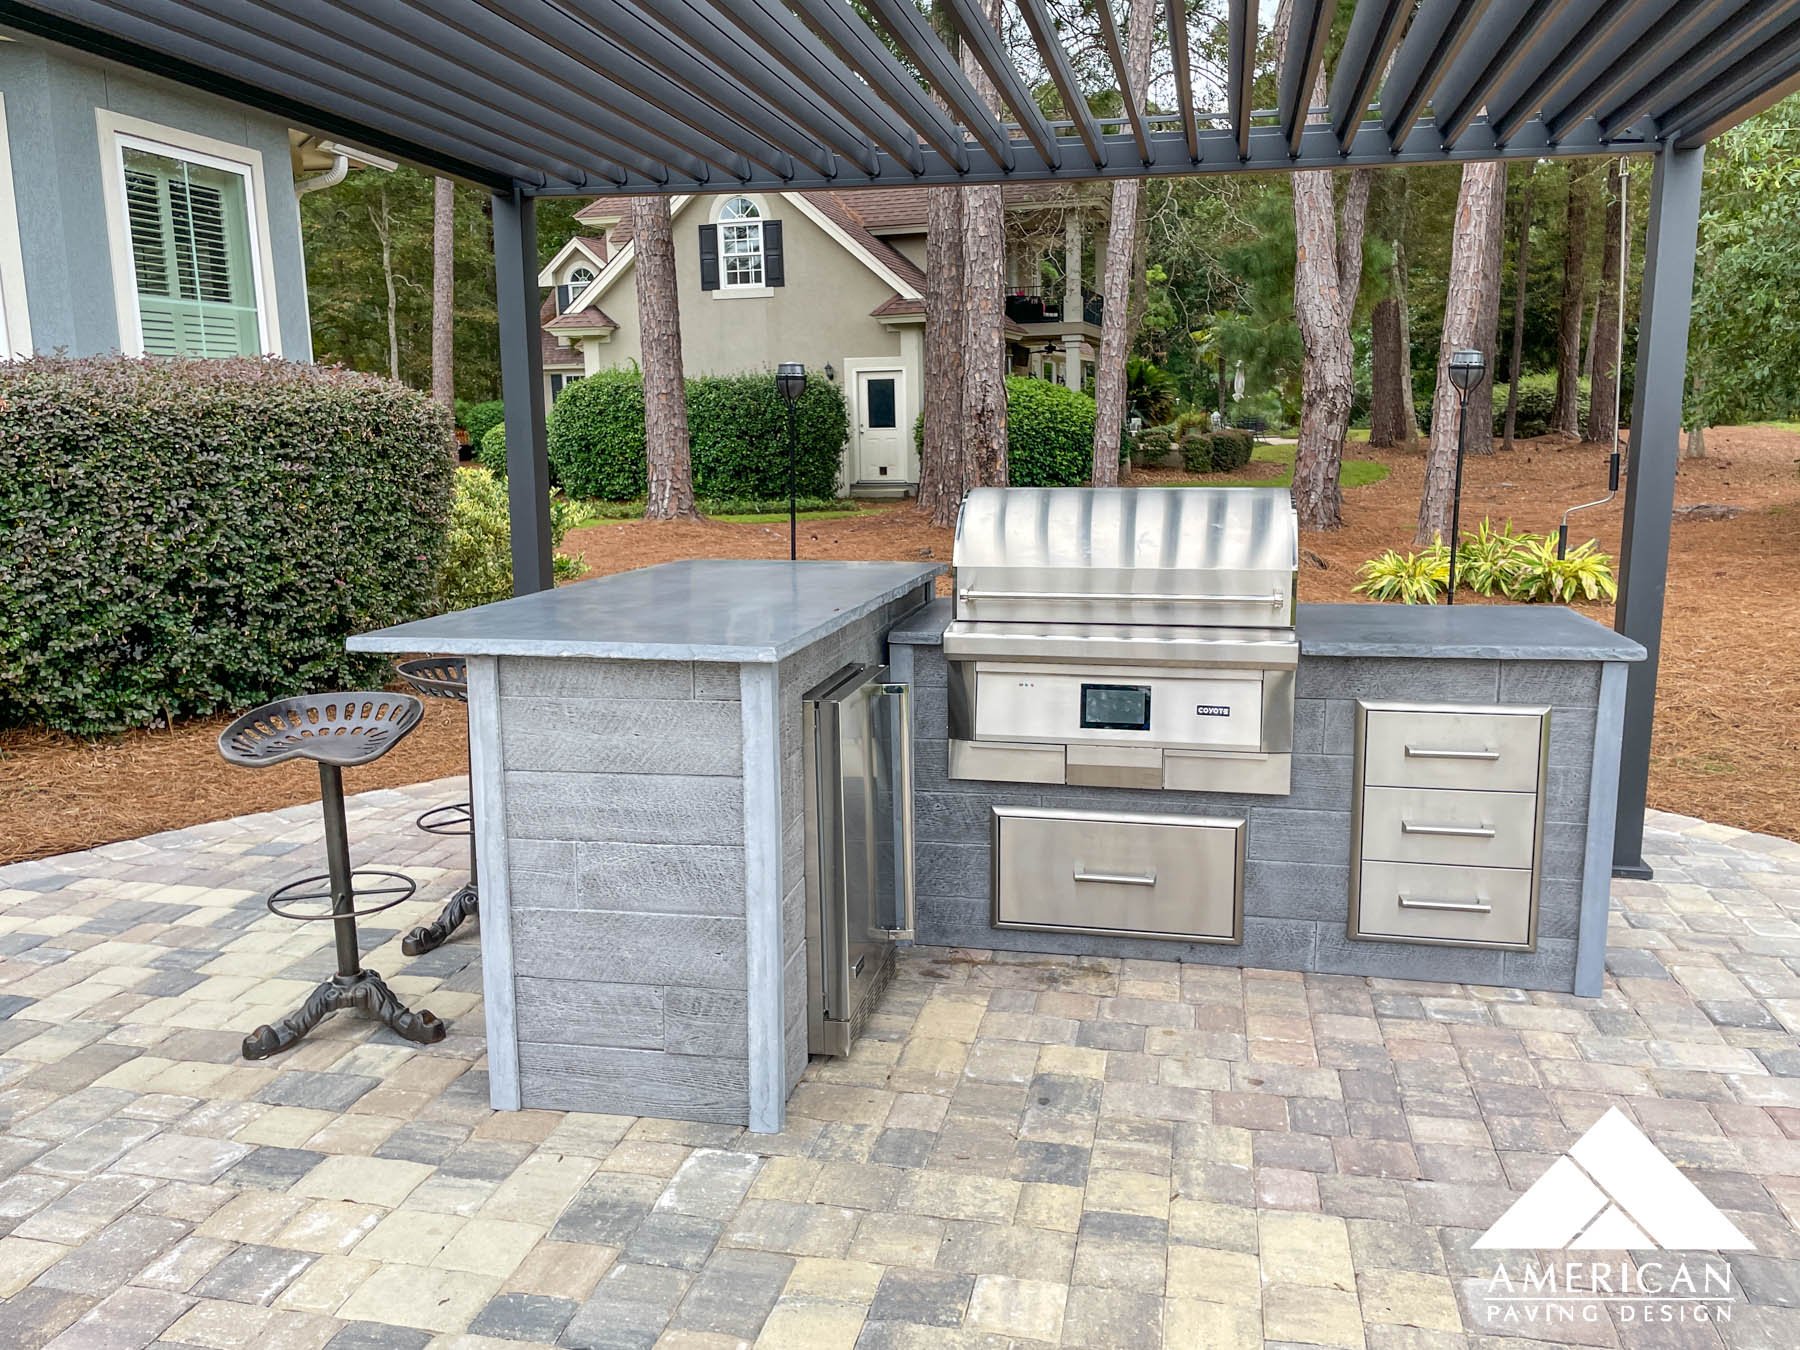 Outdoor Living Today — American Paving Design